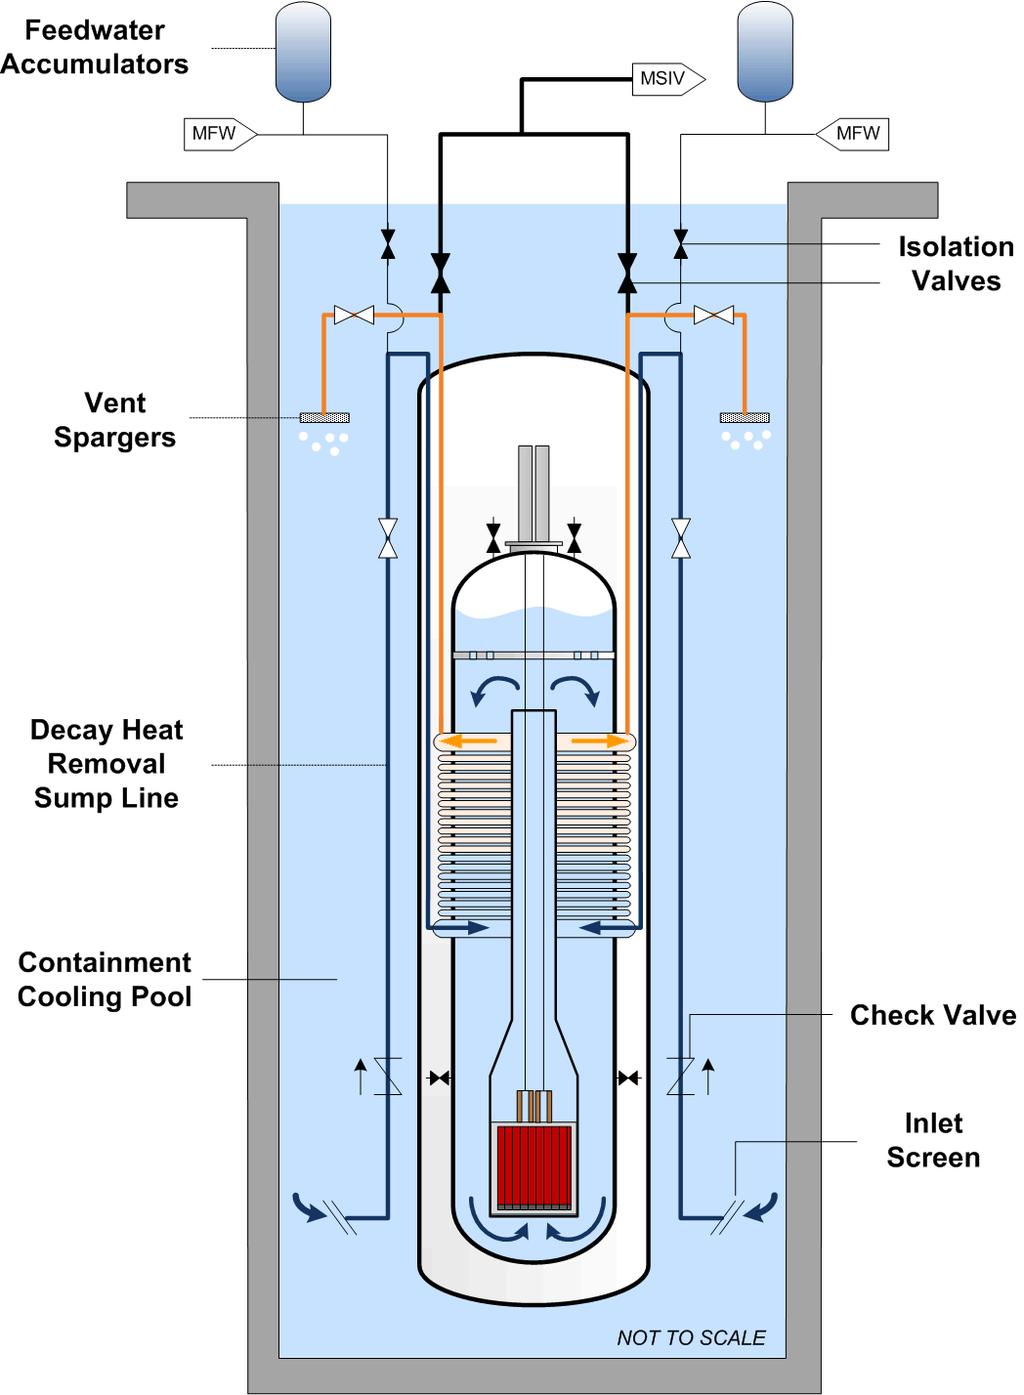 Decay Heat Removal ( DHRS ) System Two independent trains of emergency feedwater to the steam generator tube bundles Water is drawn from the containment cooling pool through a sump screen Steam is